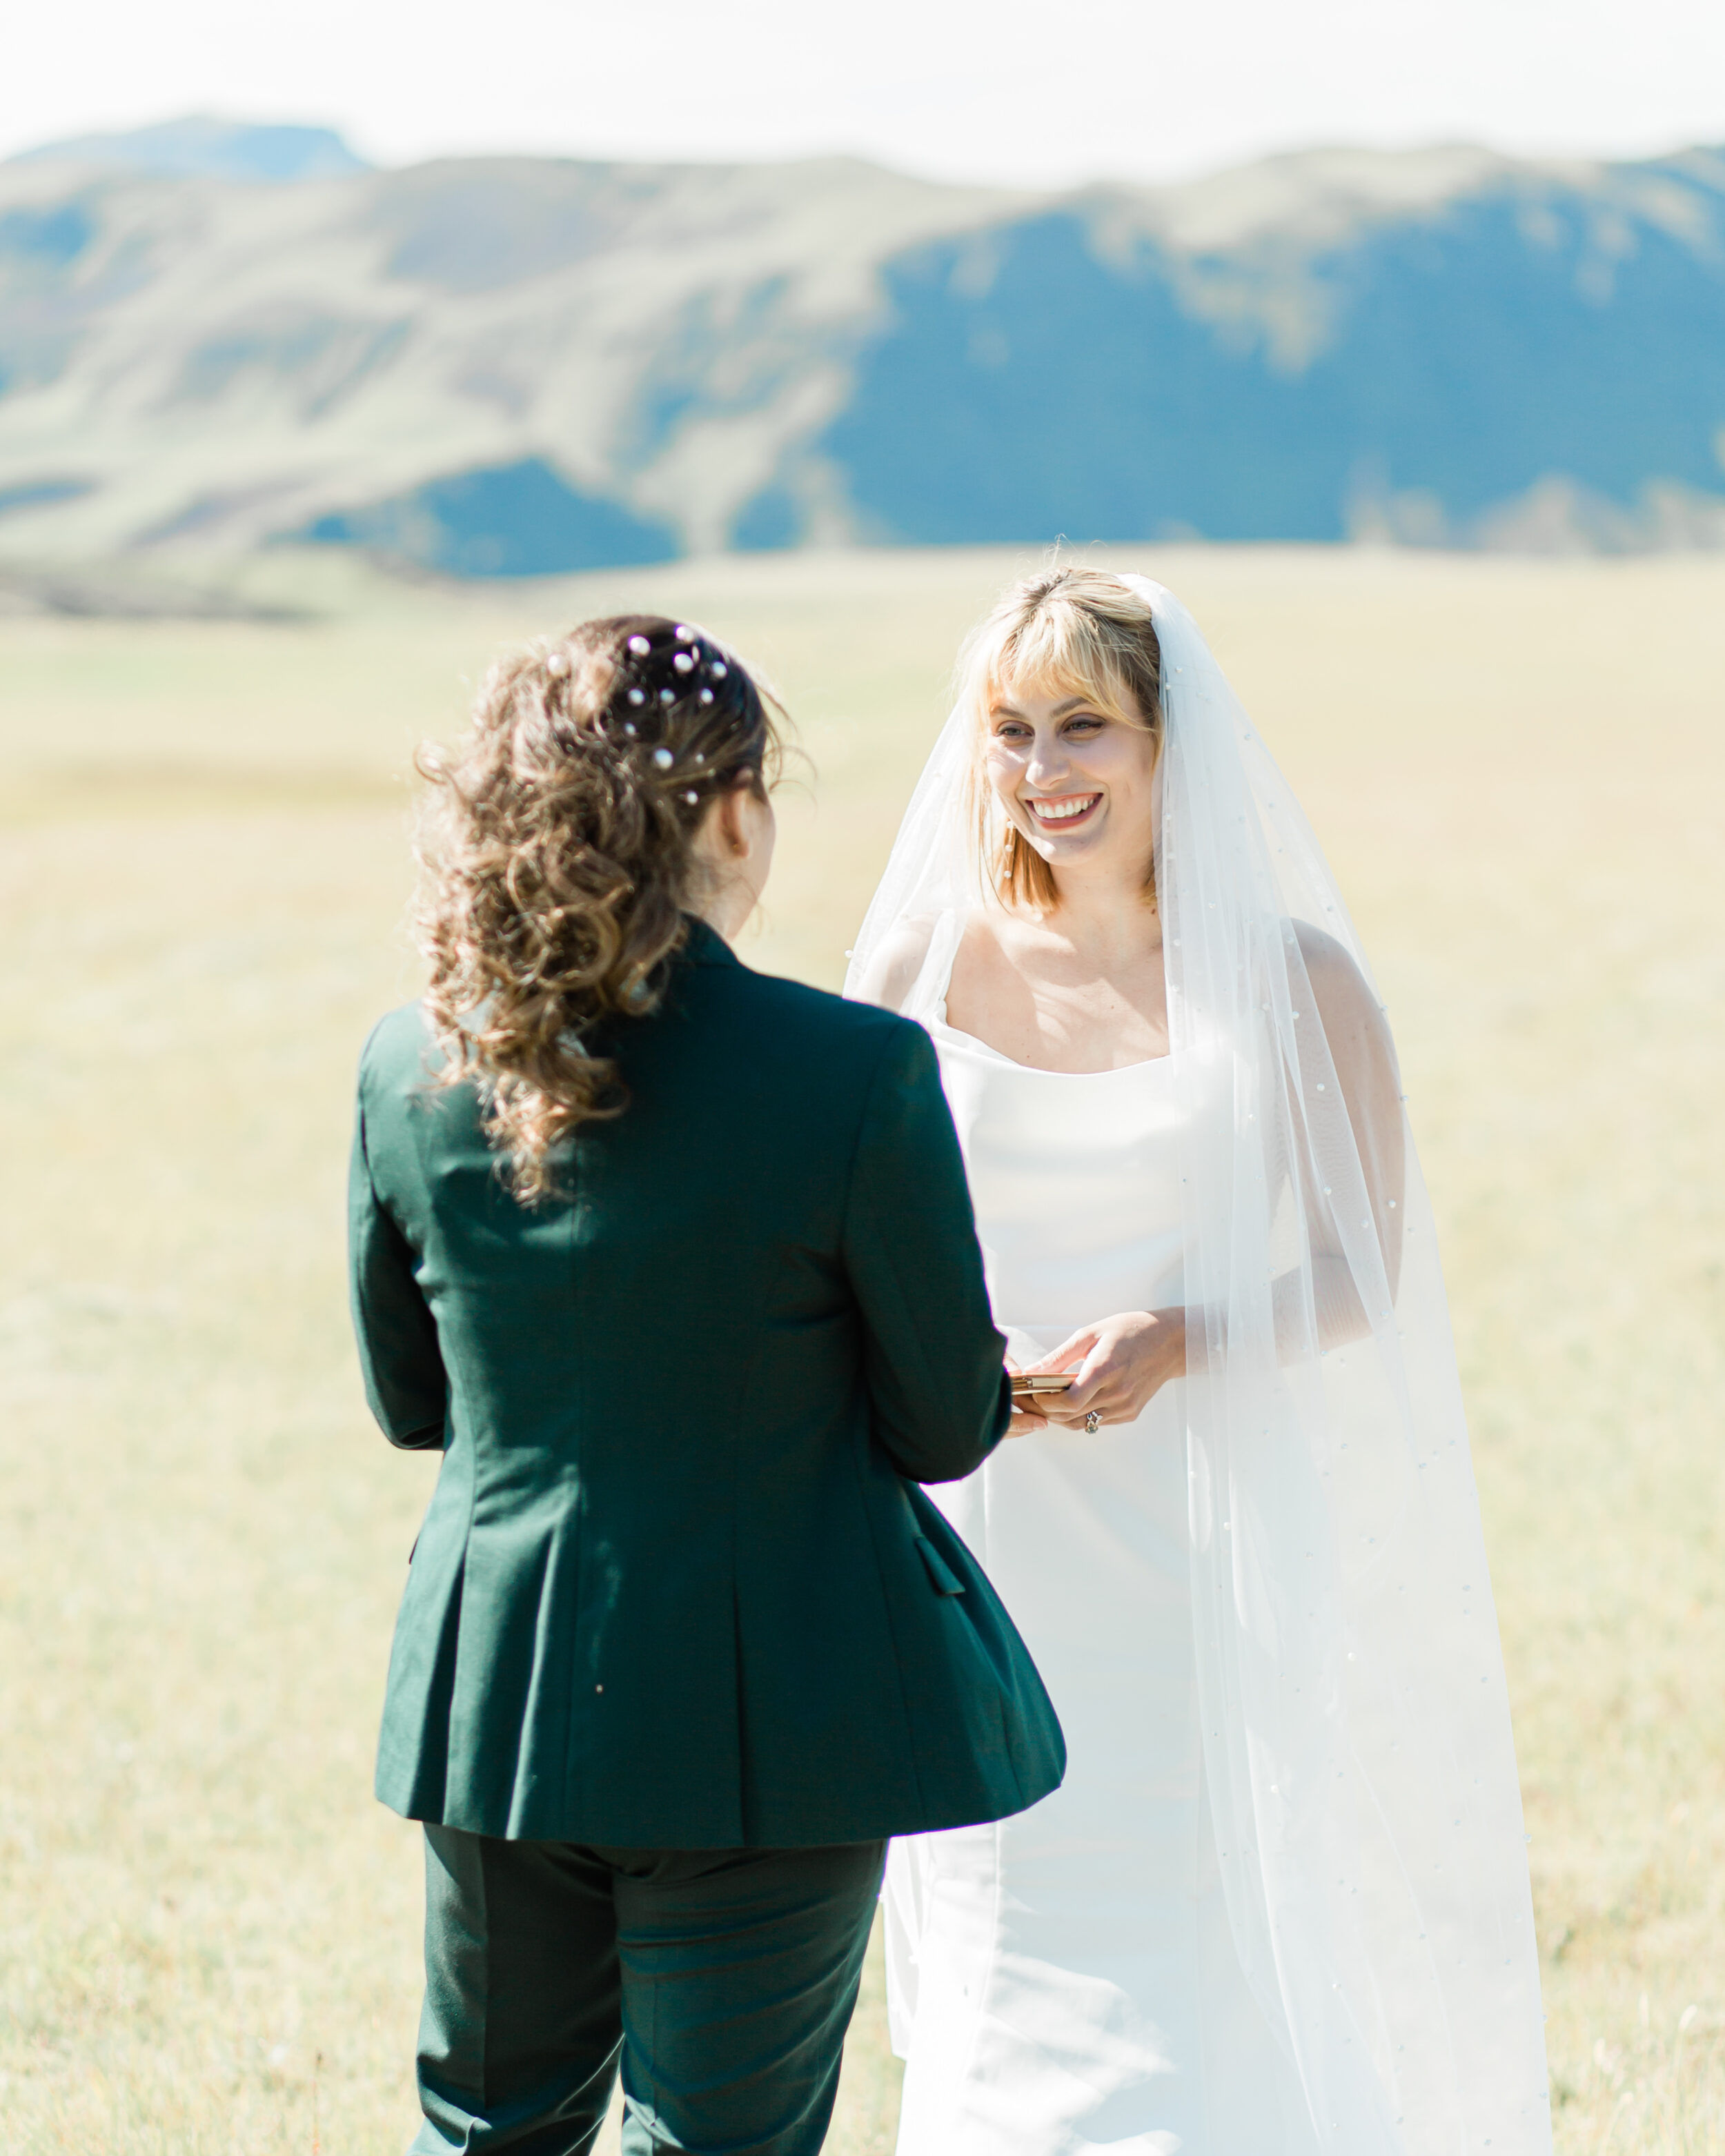 A couple says their Iceland wedding vows during their adventure elopement.